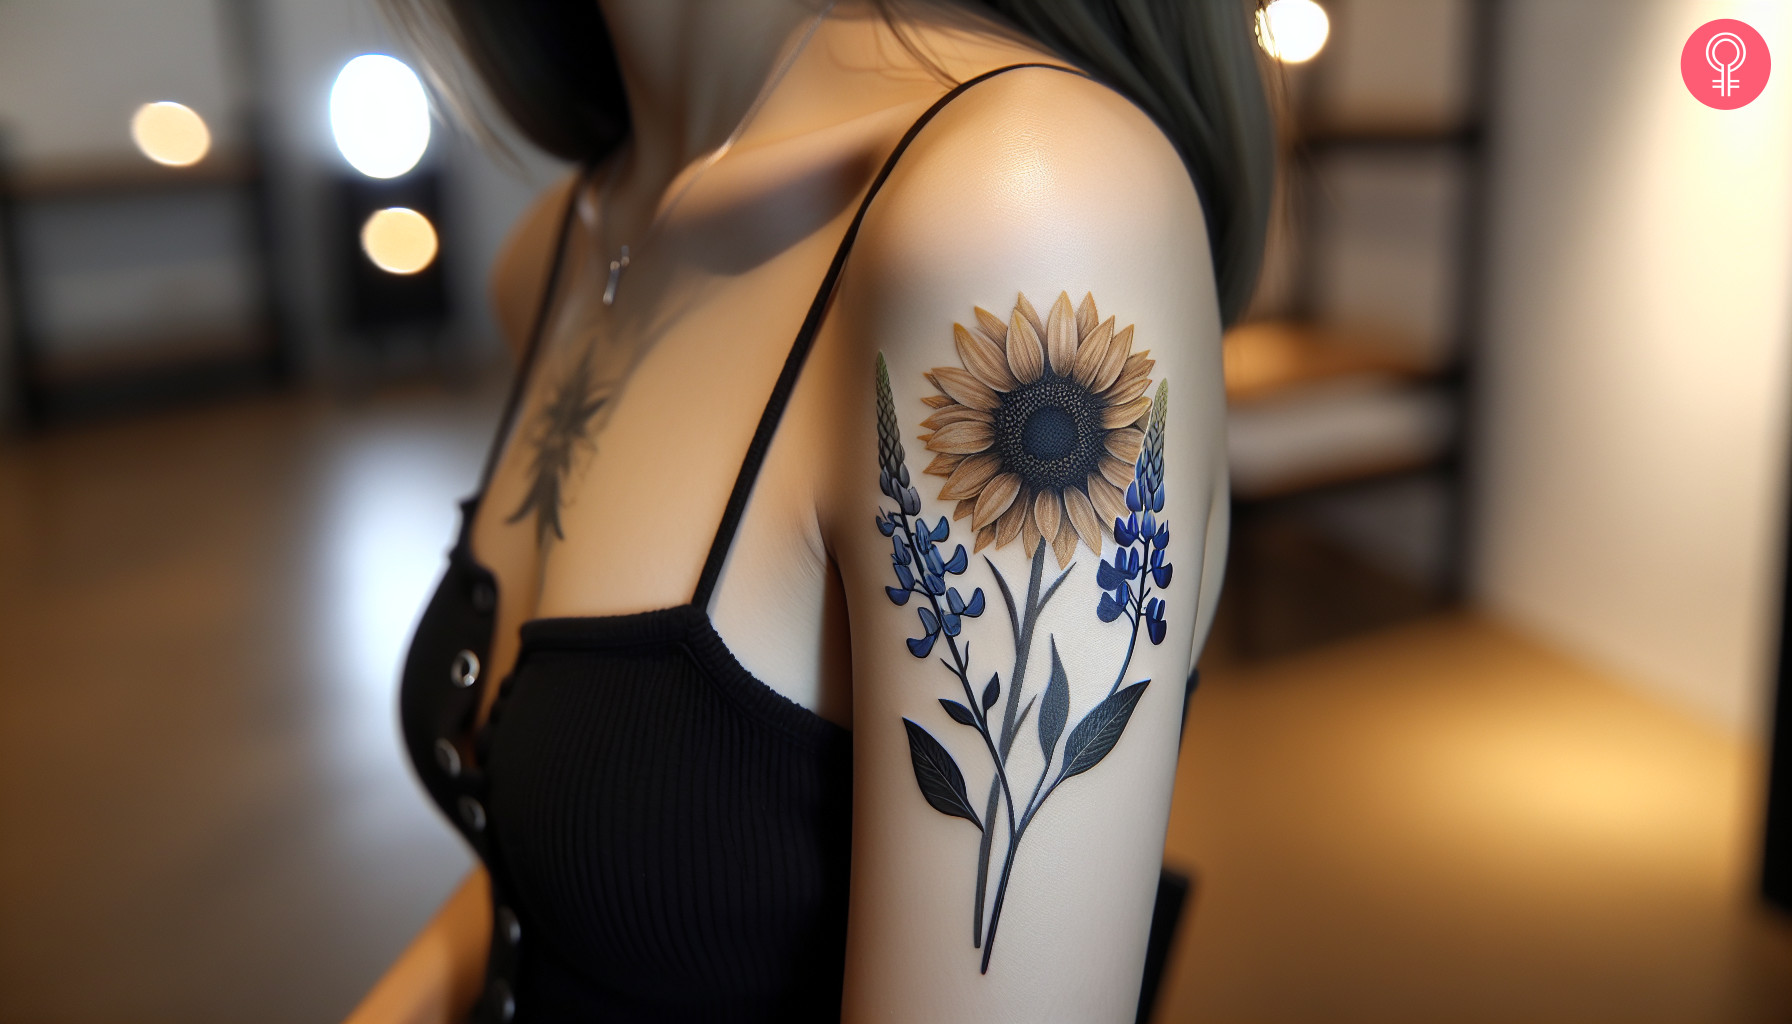 Sunflower and bluebonnet tattoo on the arm of a woman